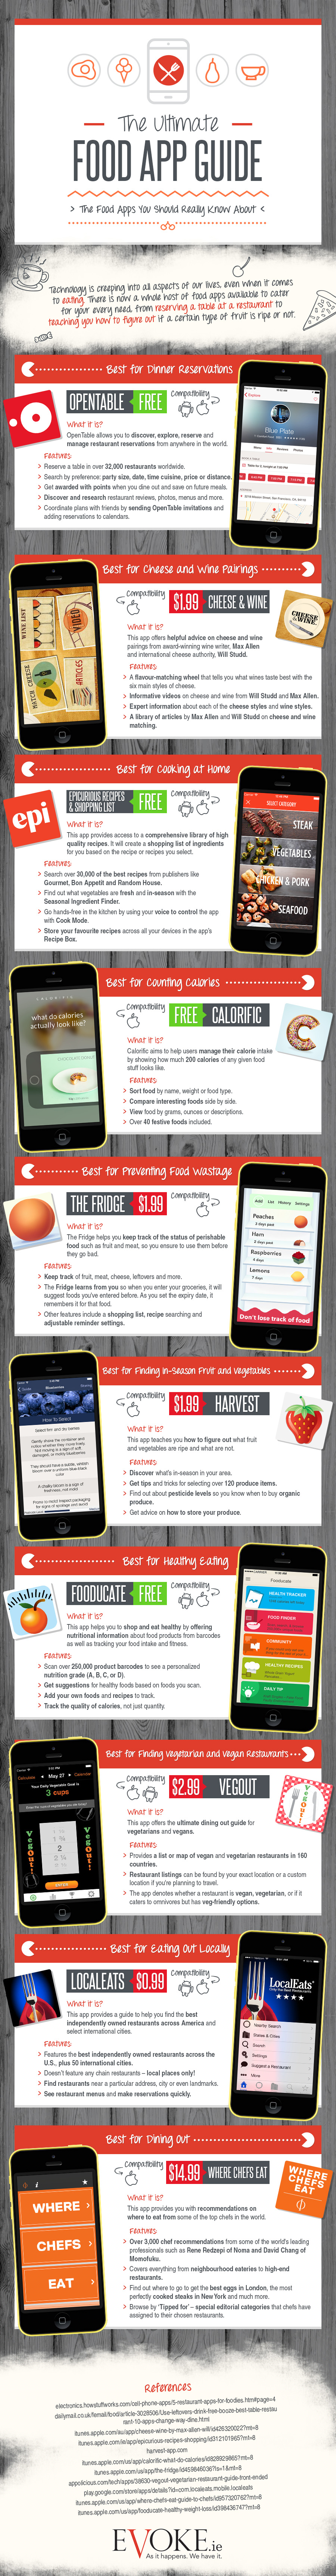 Food App Guide Infographic